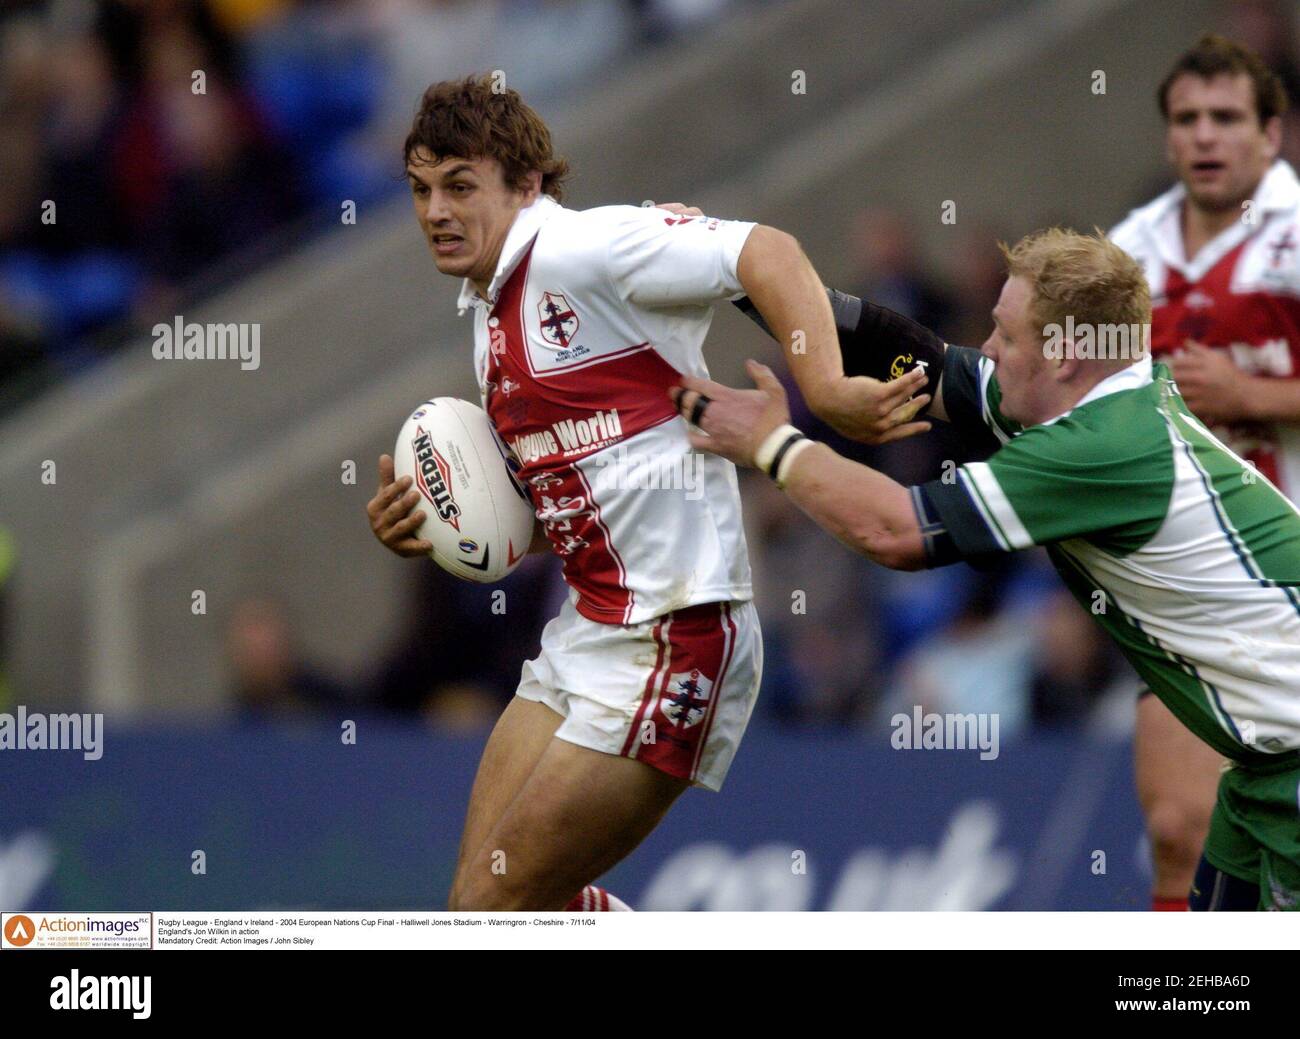 Rugby League - England v Ireland - 2004 European Nations Cup Final - Halliwell Jones Stadium - Warringron - Cheshire - 7/11/04  England's Jon Wilkin in action  Mandatory Credit: Action Images / John Sibley Stock Photo